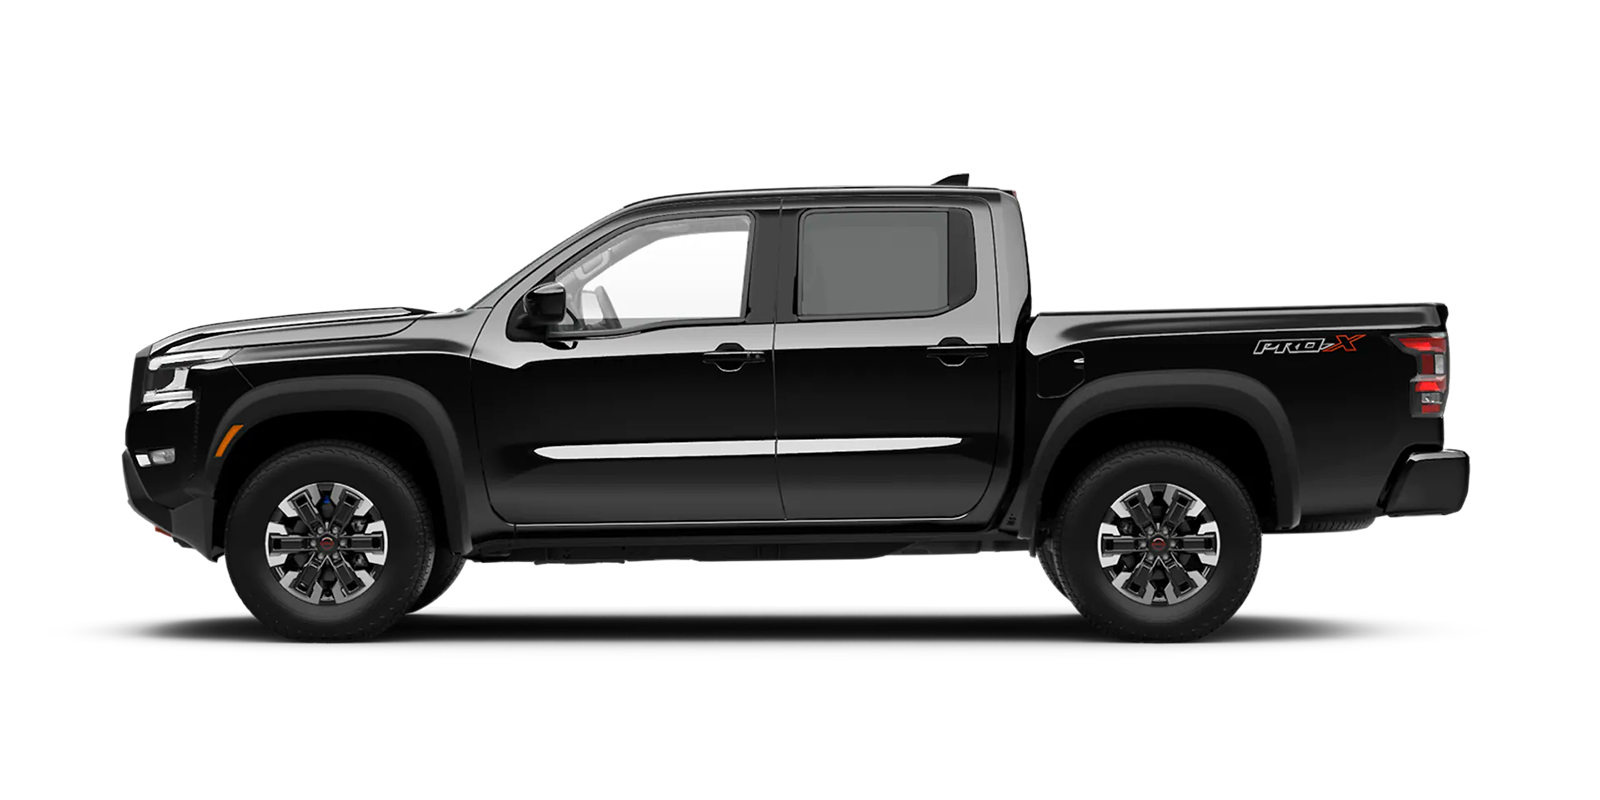 2022 Frontier Crew Cab Pro-X 4x2 in Super Black | Mountain View Nissan Of Cleveland in McDonald TN